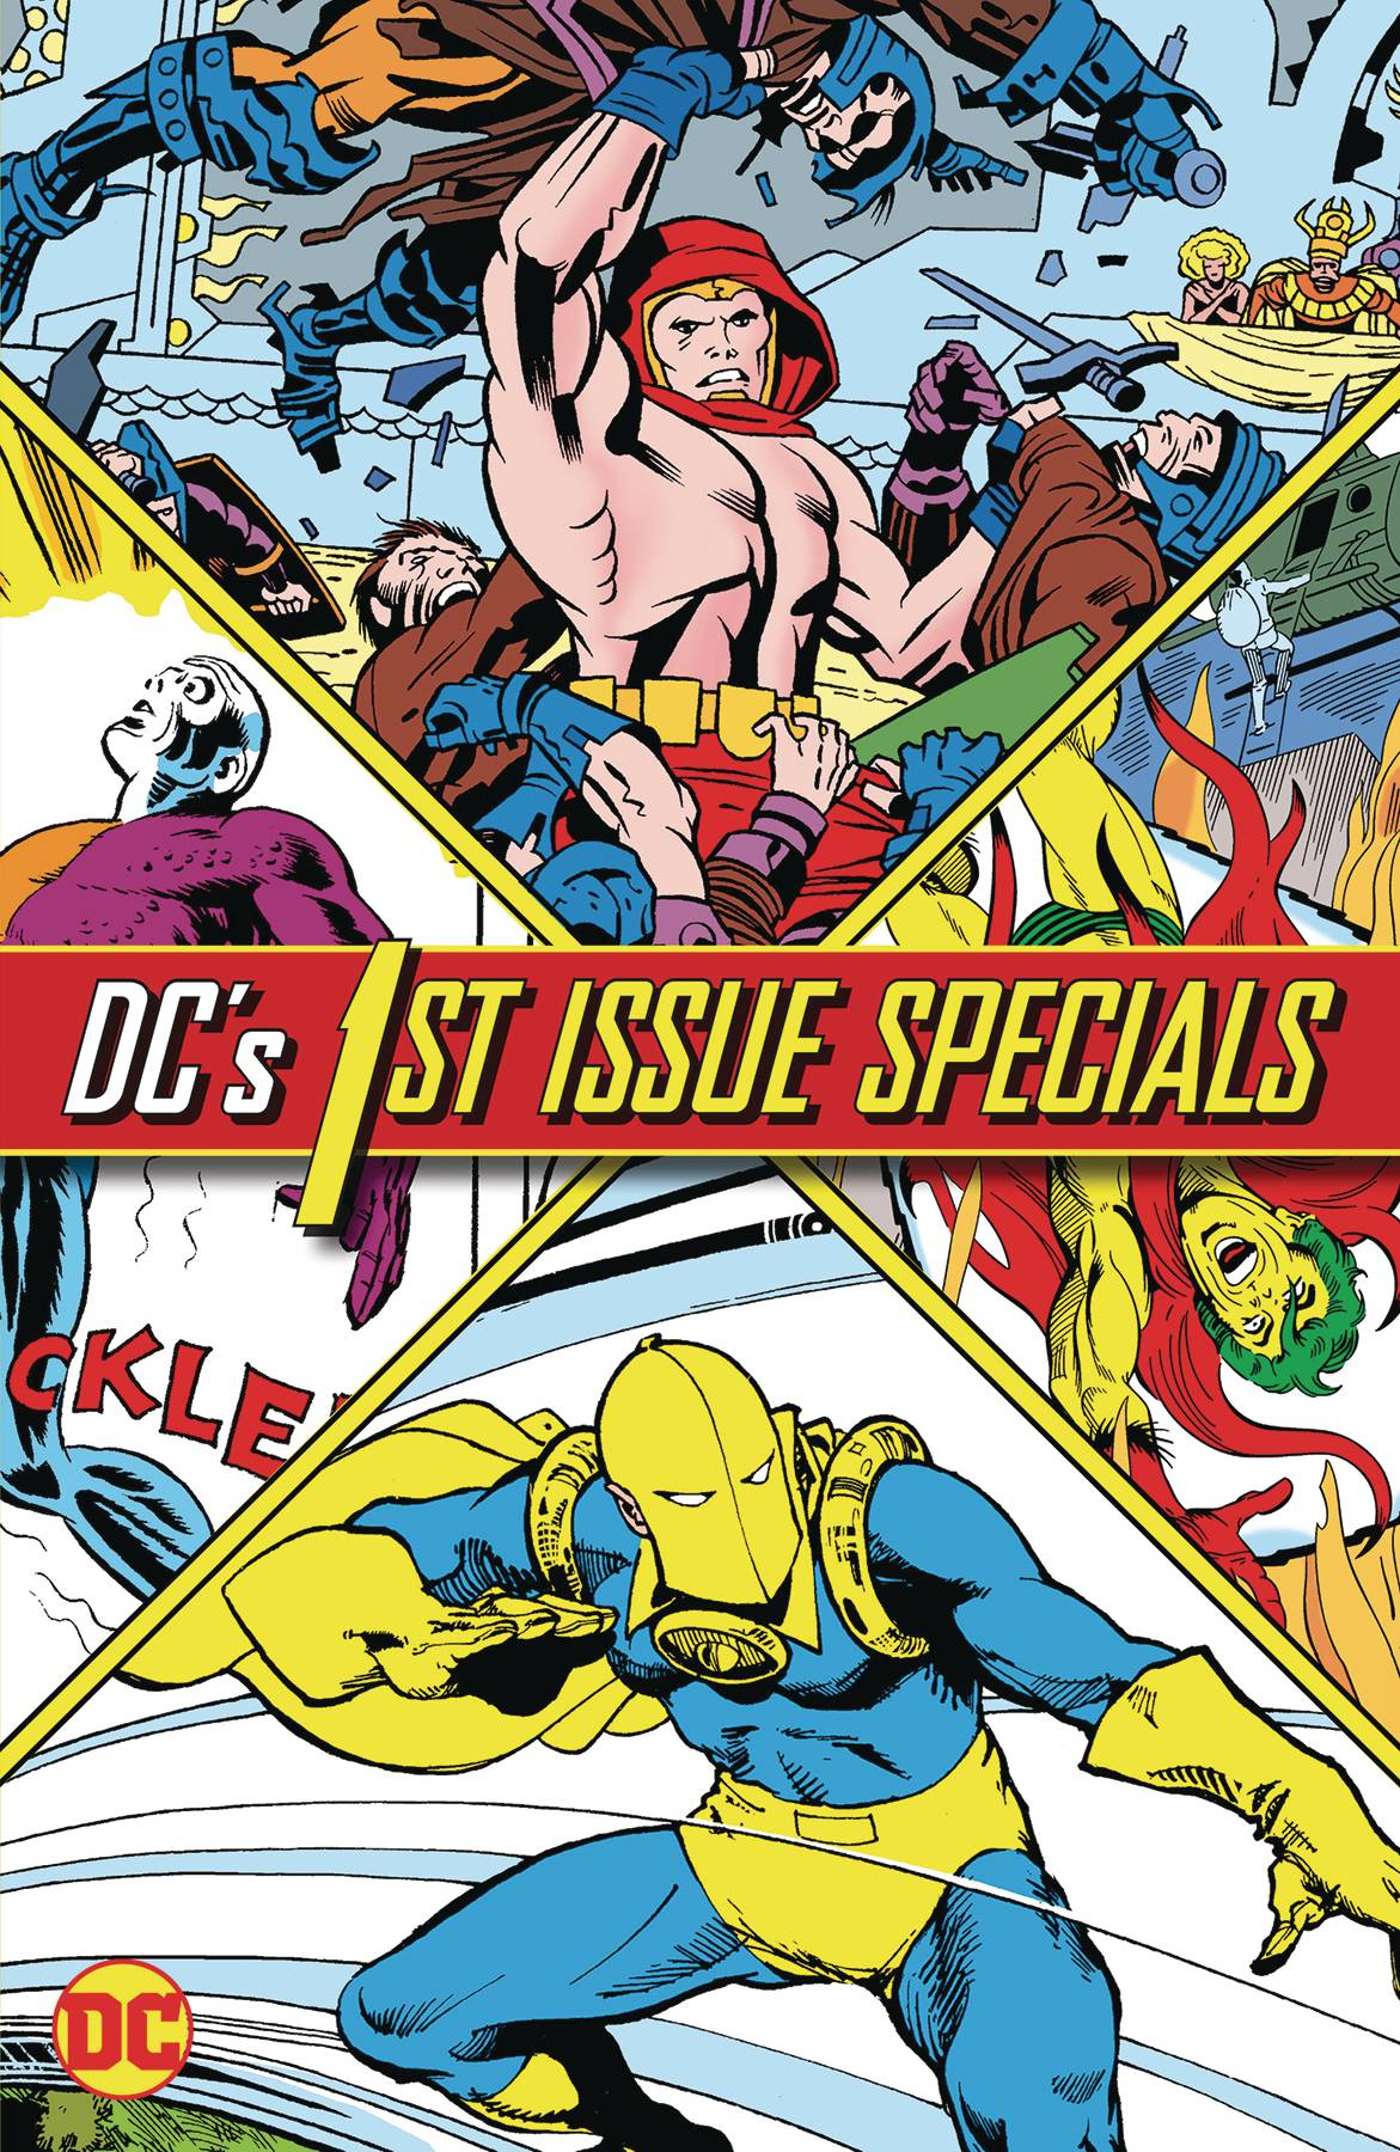 DC Published A Disastrous Series In Which Every Issue Was A First Issue